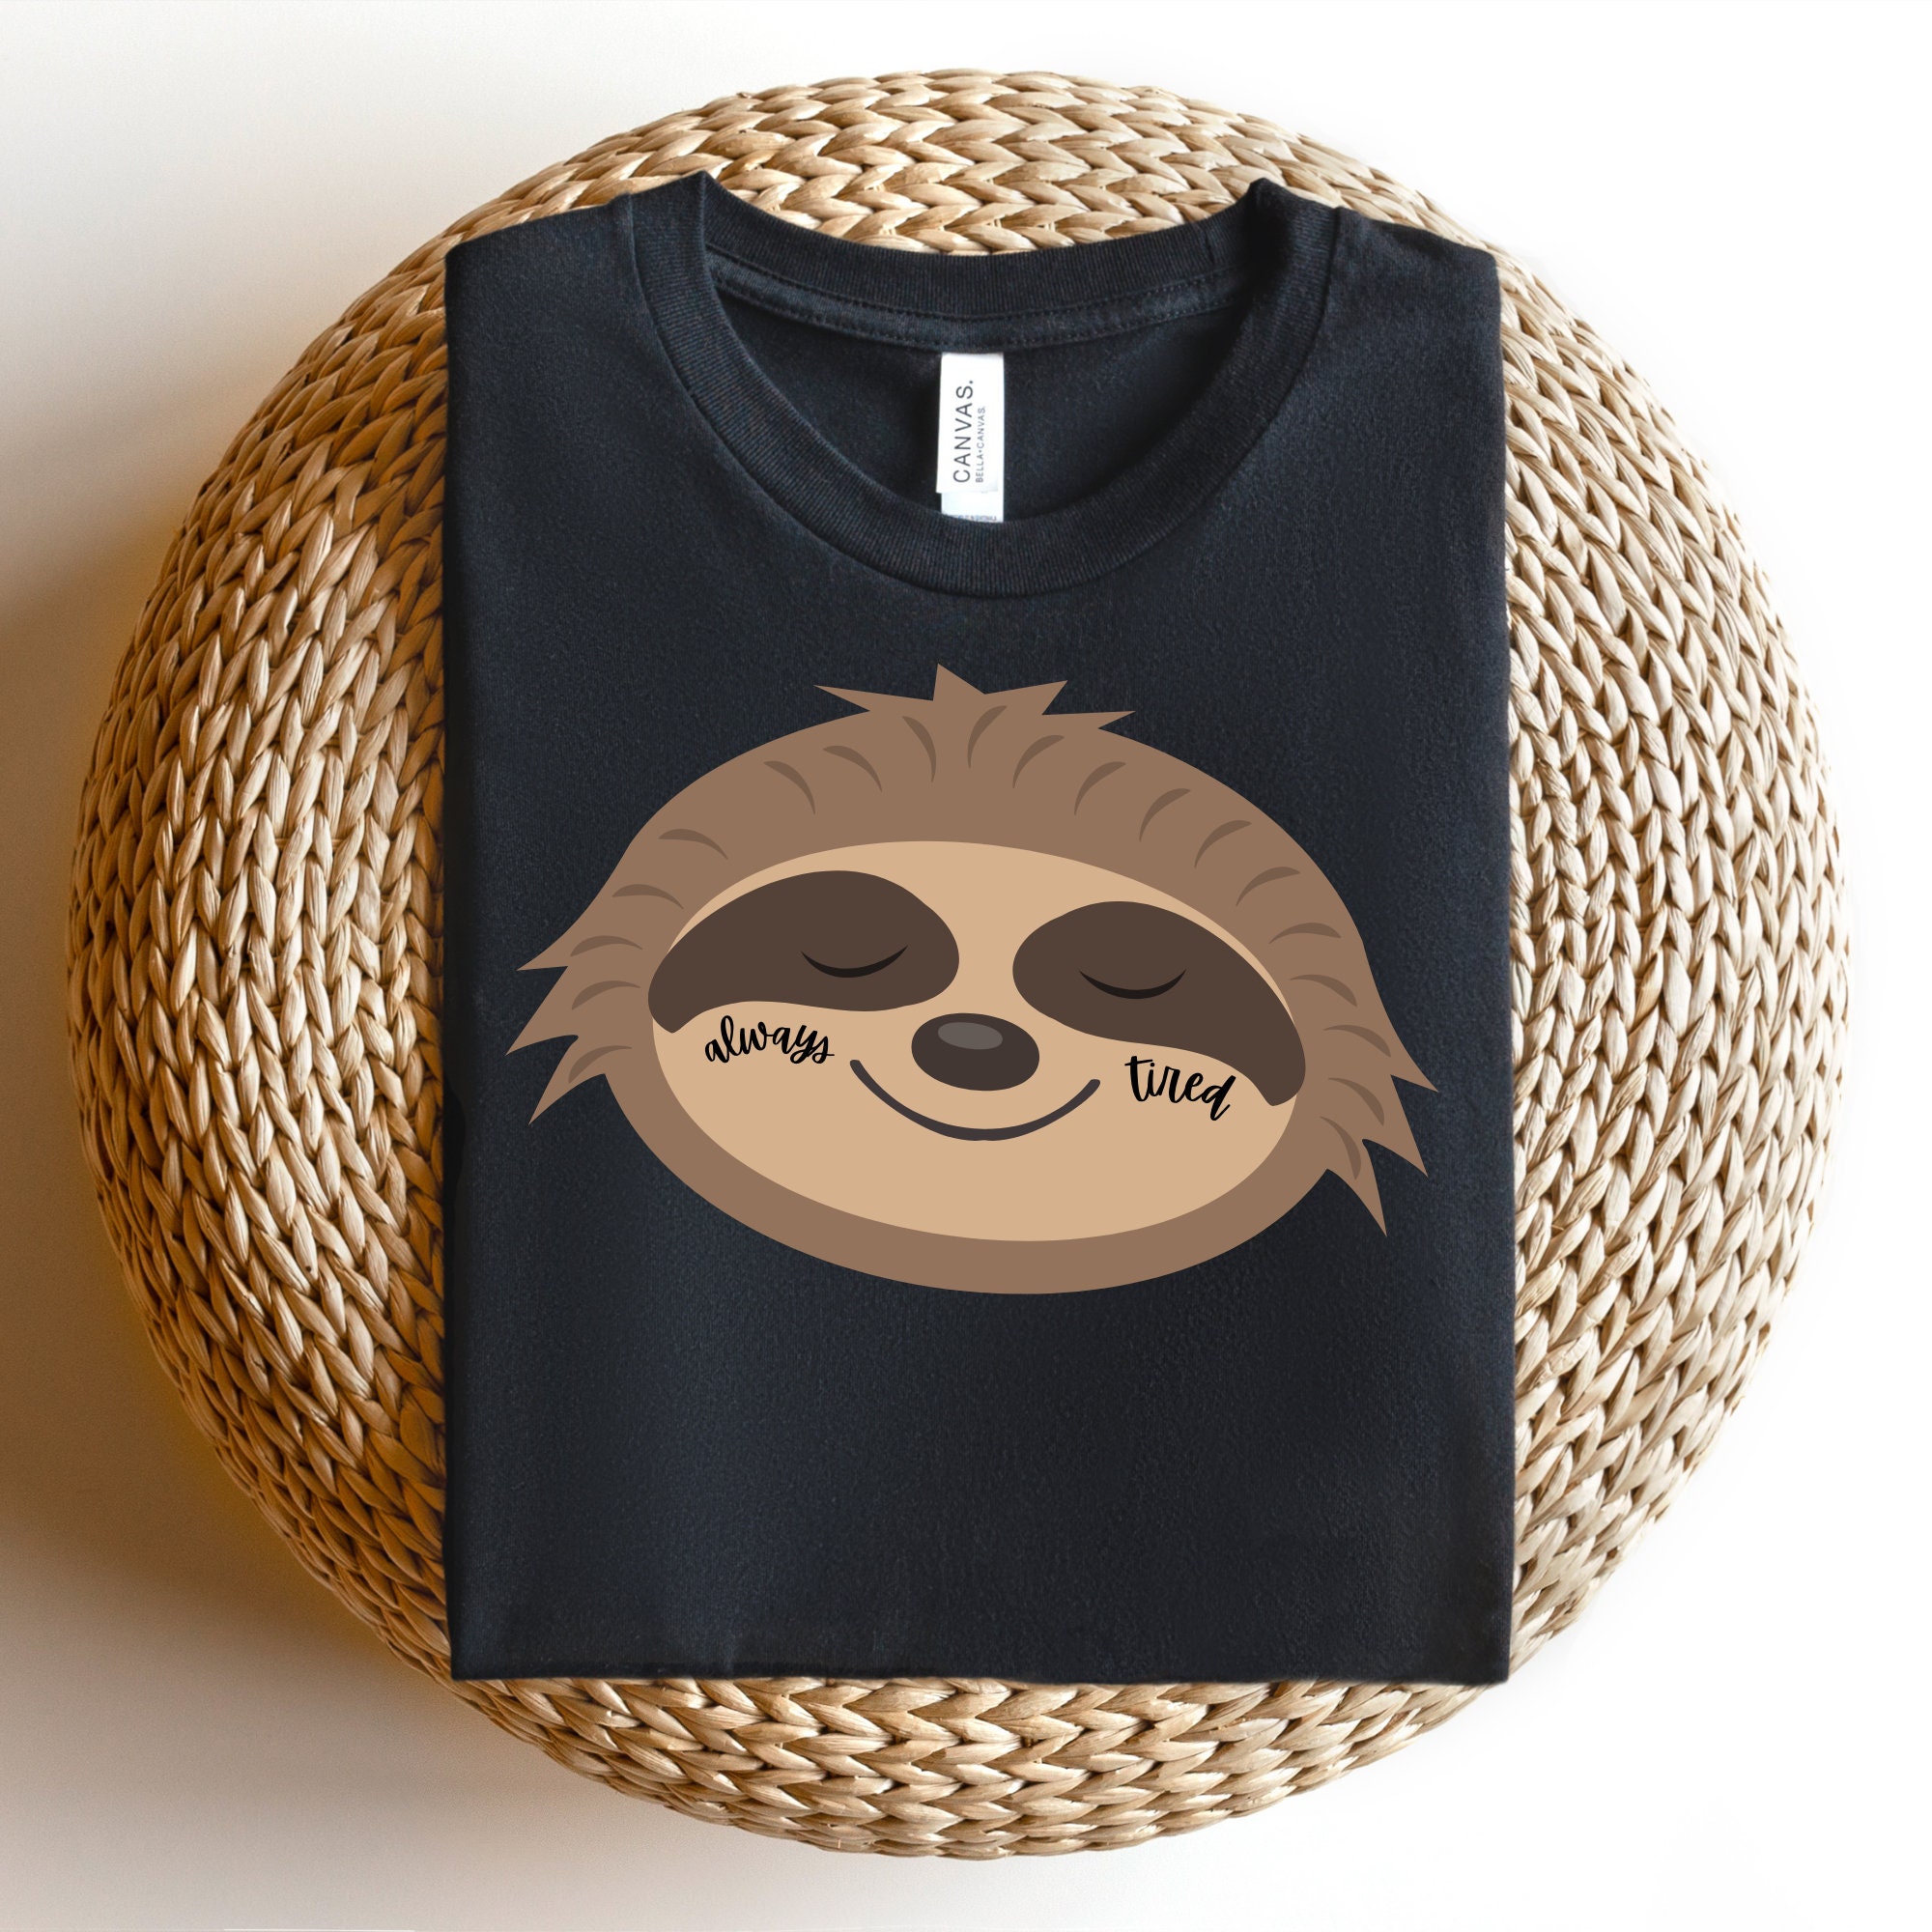 Sloth Malone Sloth SVG Bundle Sloth Clipart for Sloth Gifts - Etsy